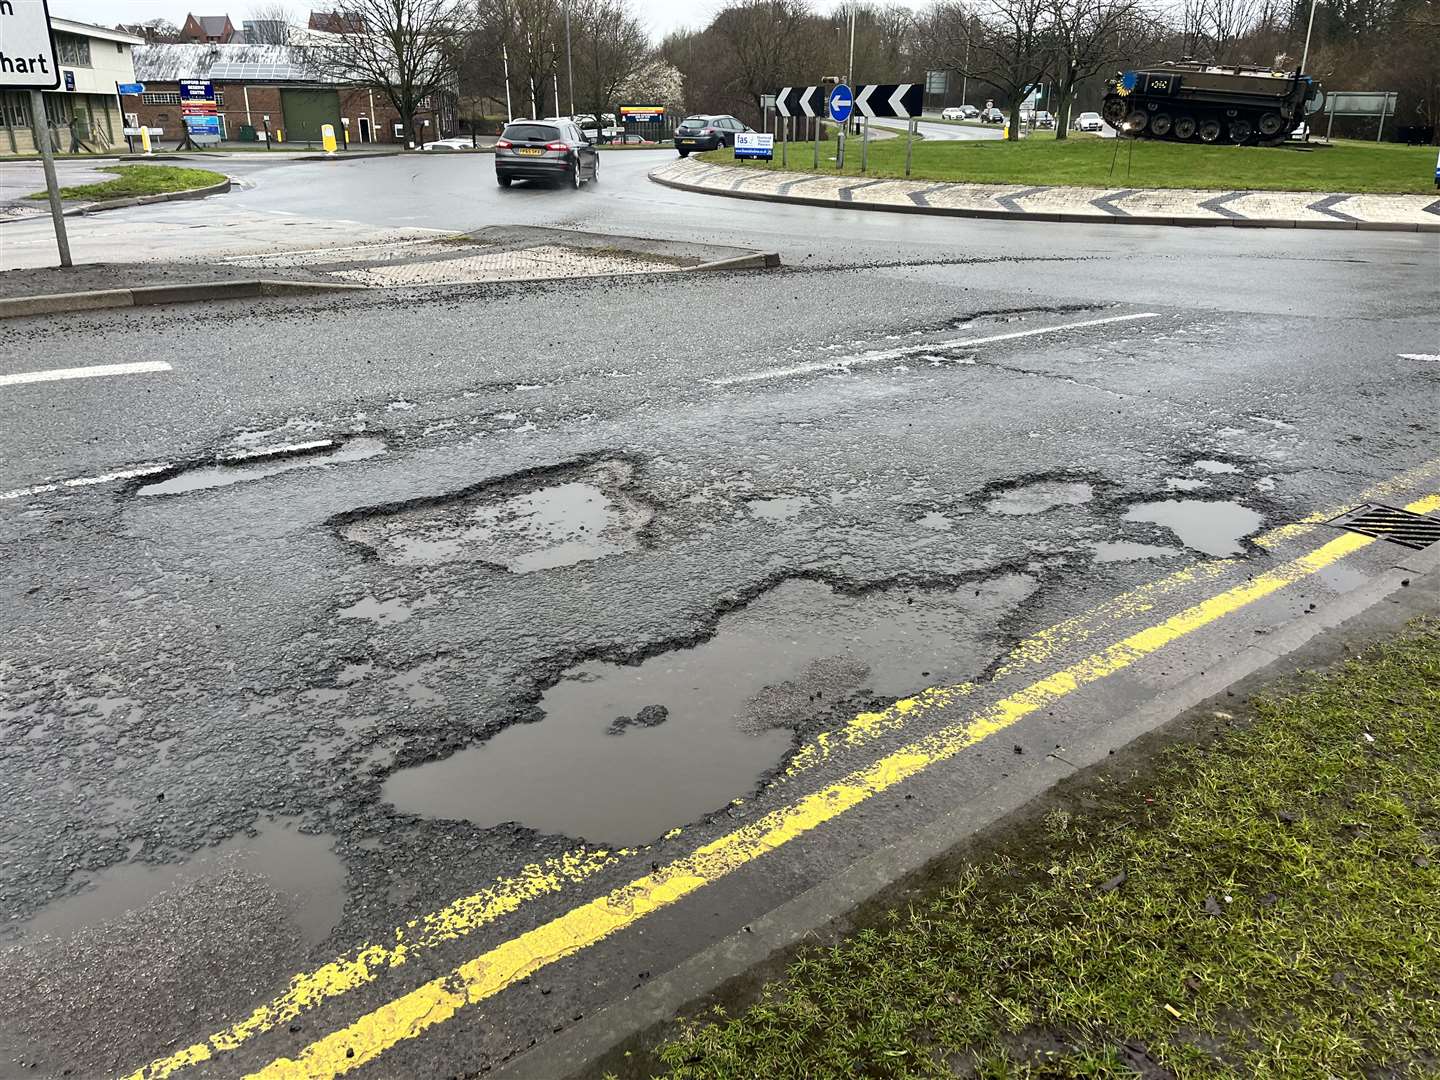 There are also bad potholes in Chart Road near the tank roundabout